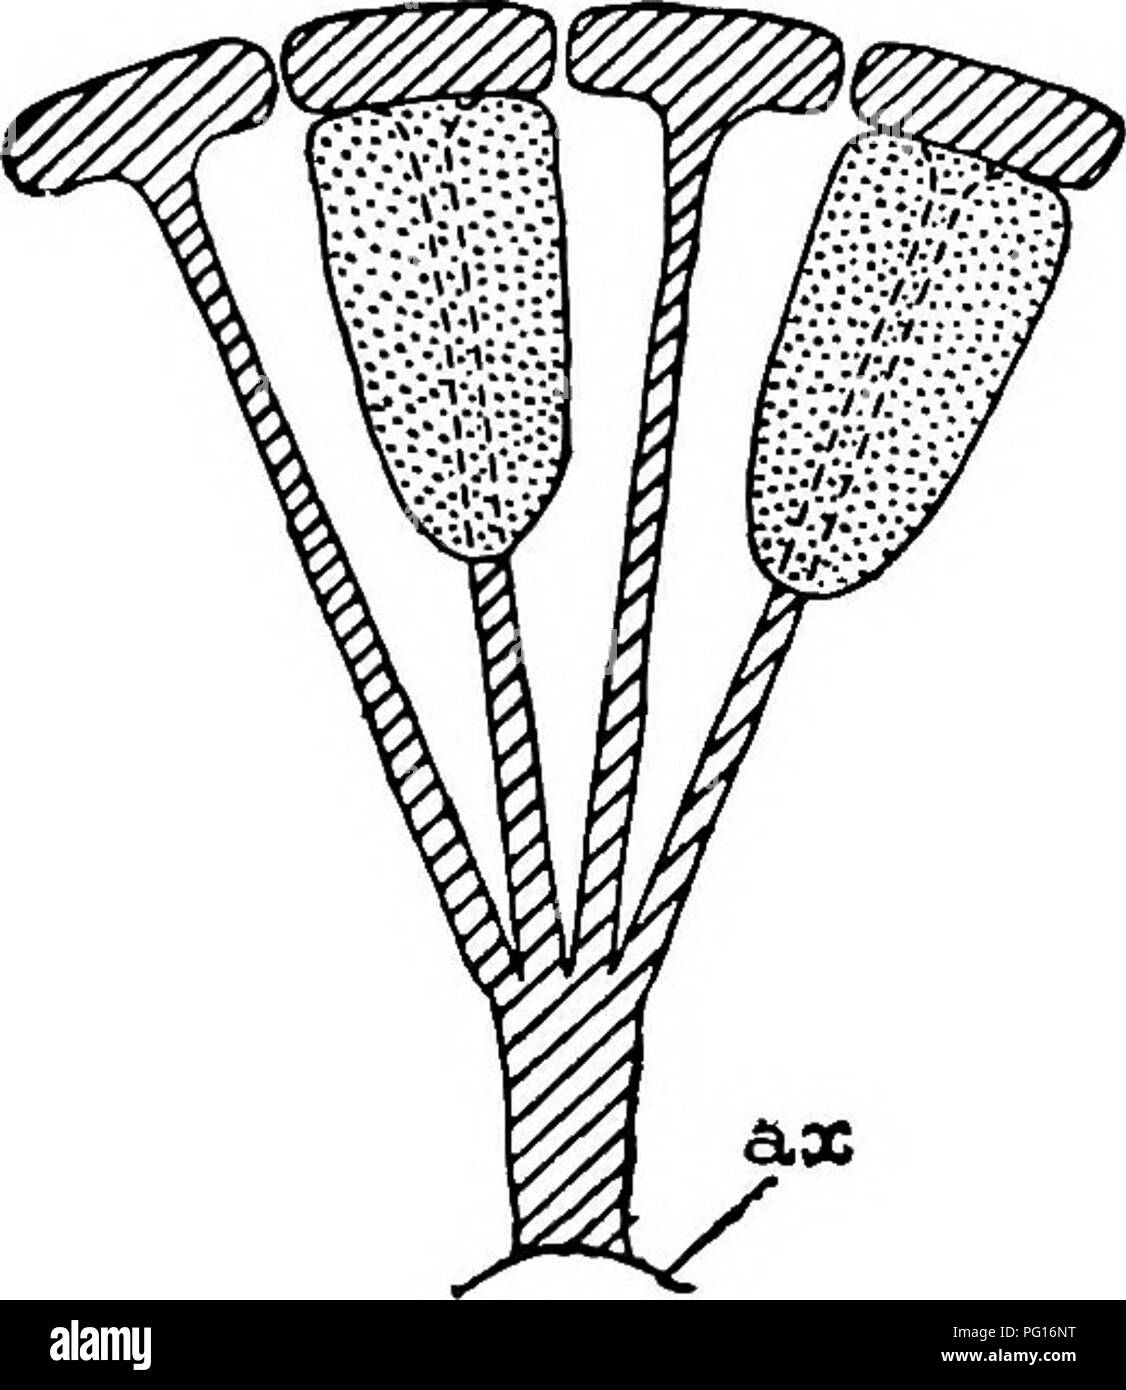 . Fossil plants : for students of botany and geology . Paleobotany. XIl] SPHENOPHYLLUM the base and forming a narrow flange encircling the axis. Each bract, the base of which forms part of the narrow collar surrounding the axis, consists of two lobes, ventral and dorsal, divided palmately into several (sometimes four) segments or sporangiophores (fig. 115). Each sporangiophore terminates distally in an oblong or oval lamina bearing two sporangia on its adaxial face (fig. 114). The space between the axis and the periphery of the cone is thus occupied by crowded peltate laminae, each with its pa Stock Photo